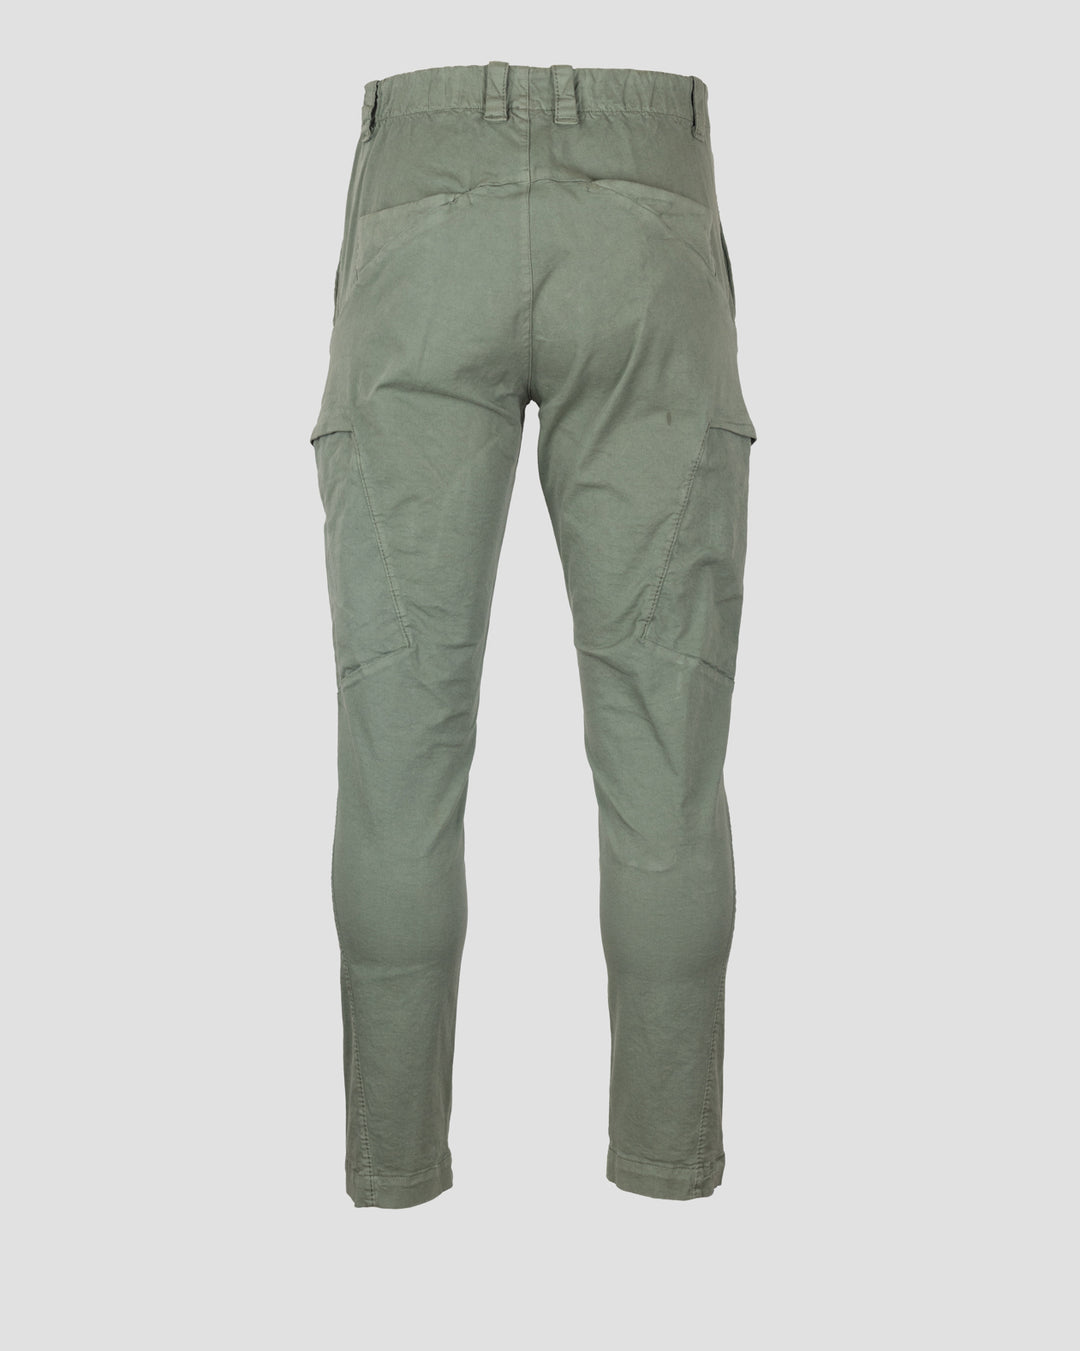 Tapered Silhouette Pants - SAGE